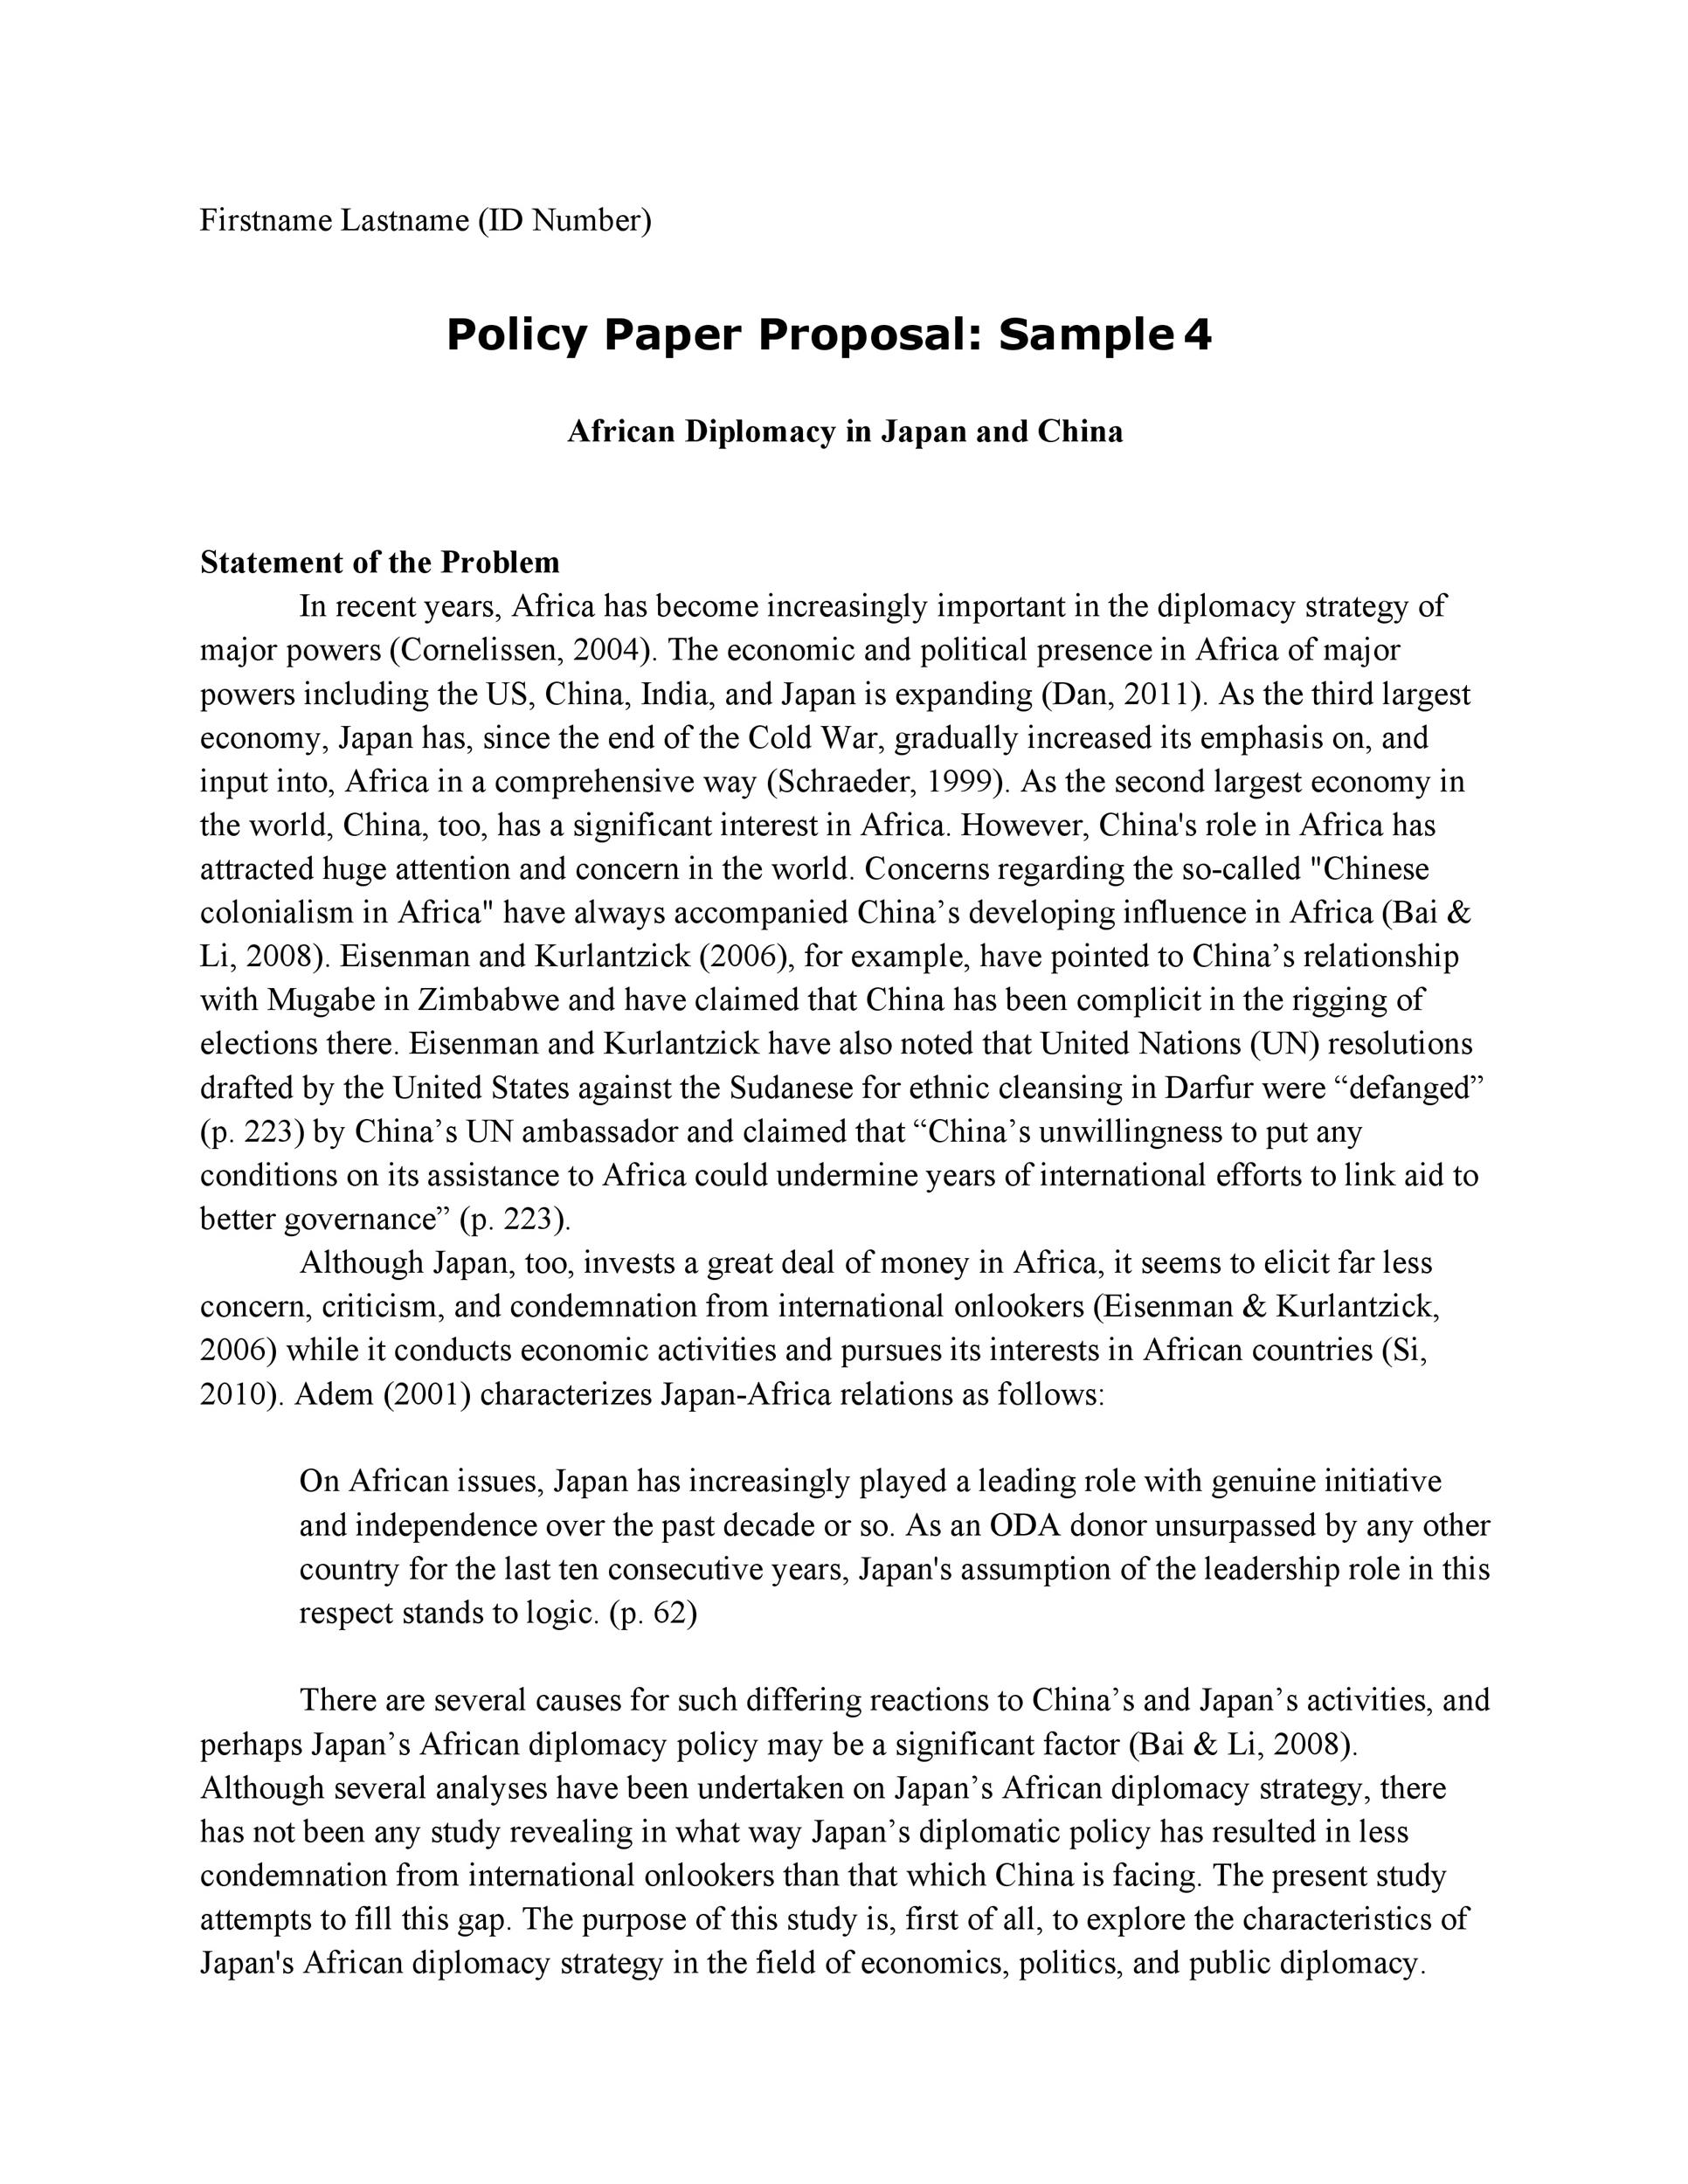 foreign policy paper example